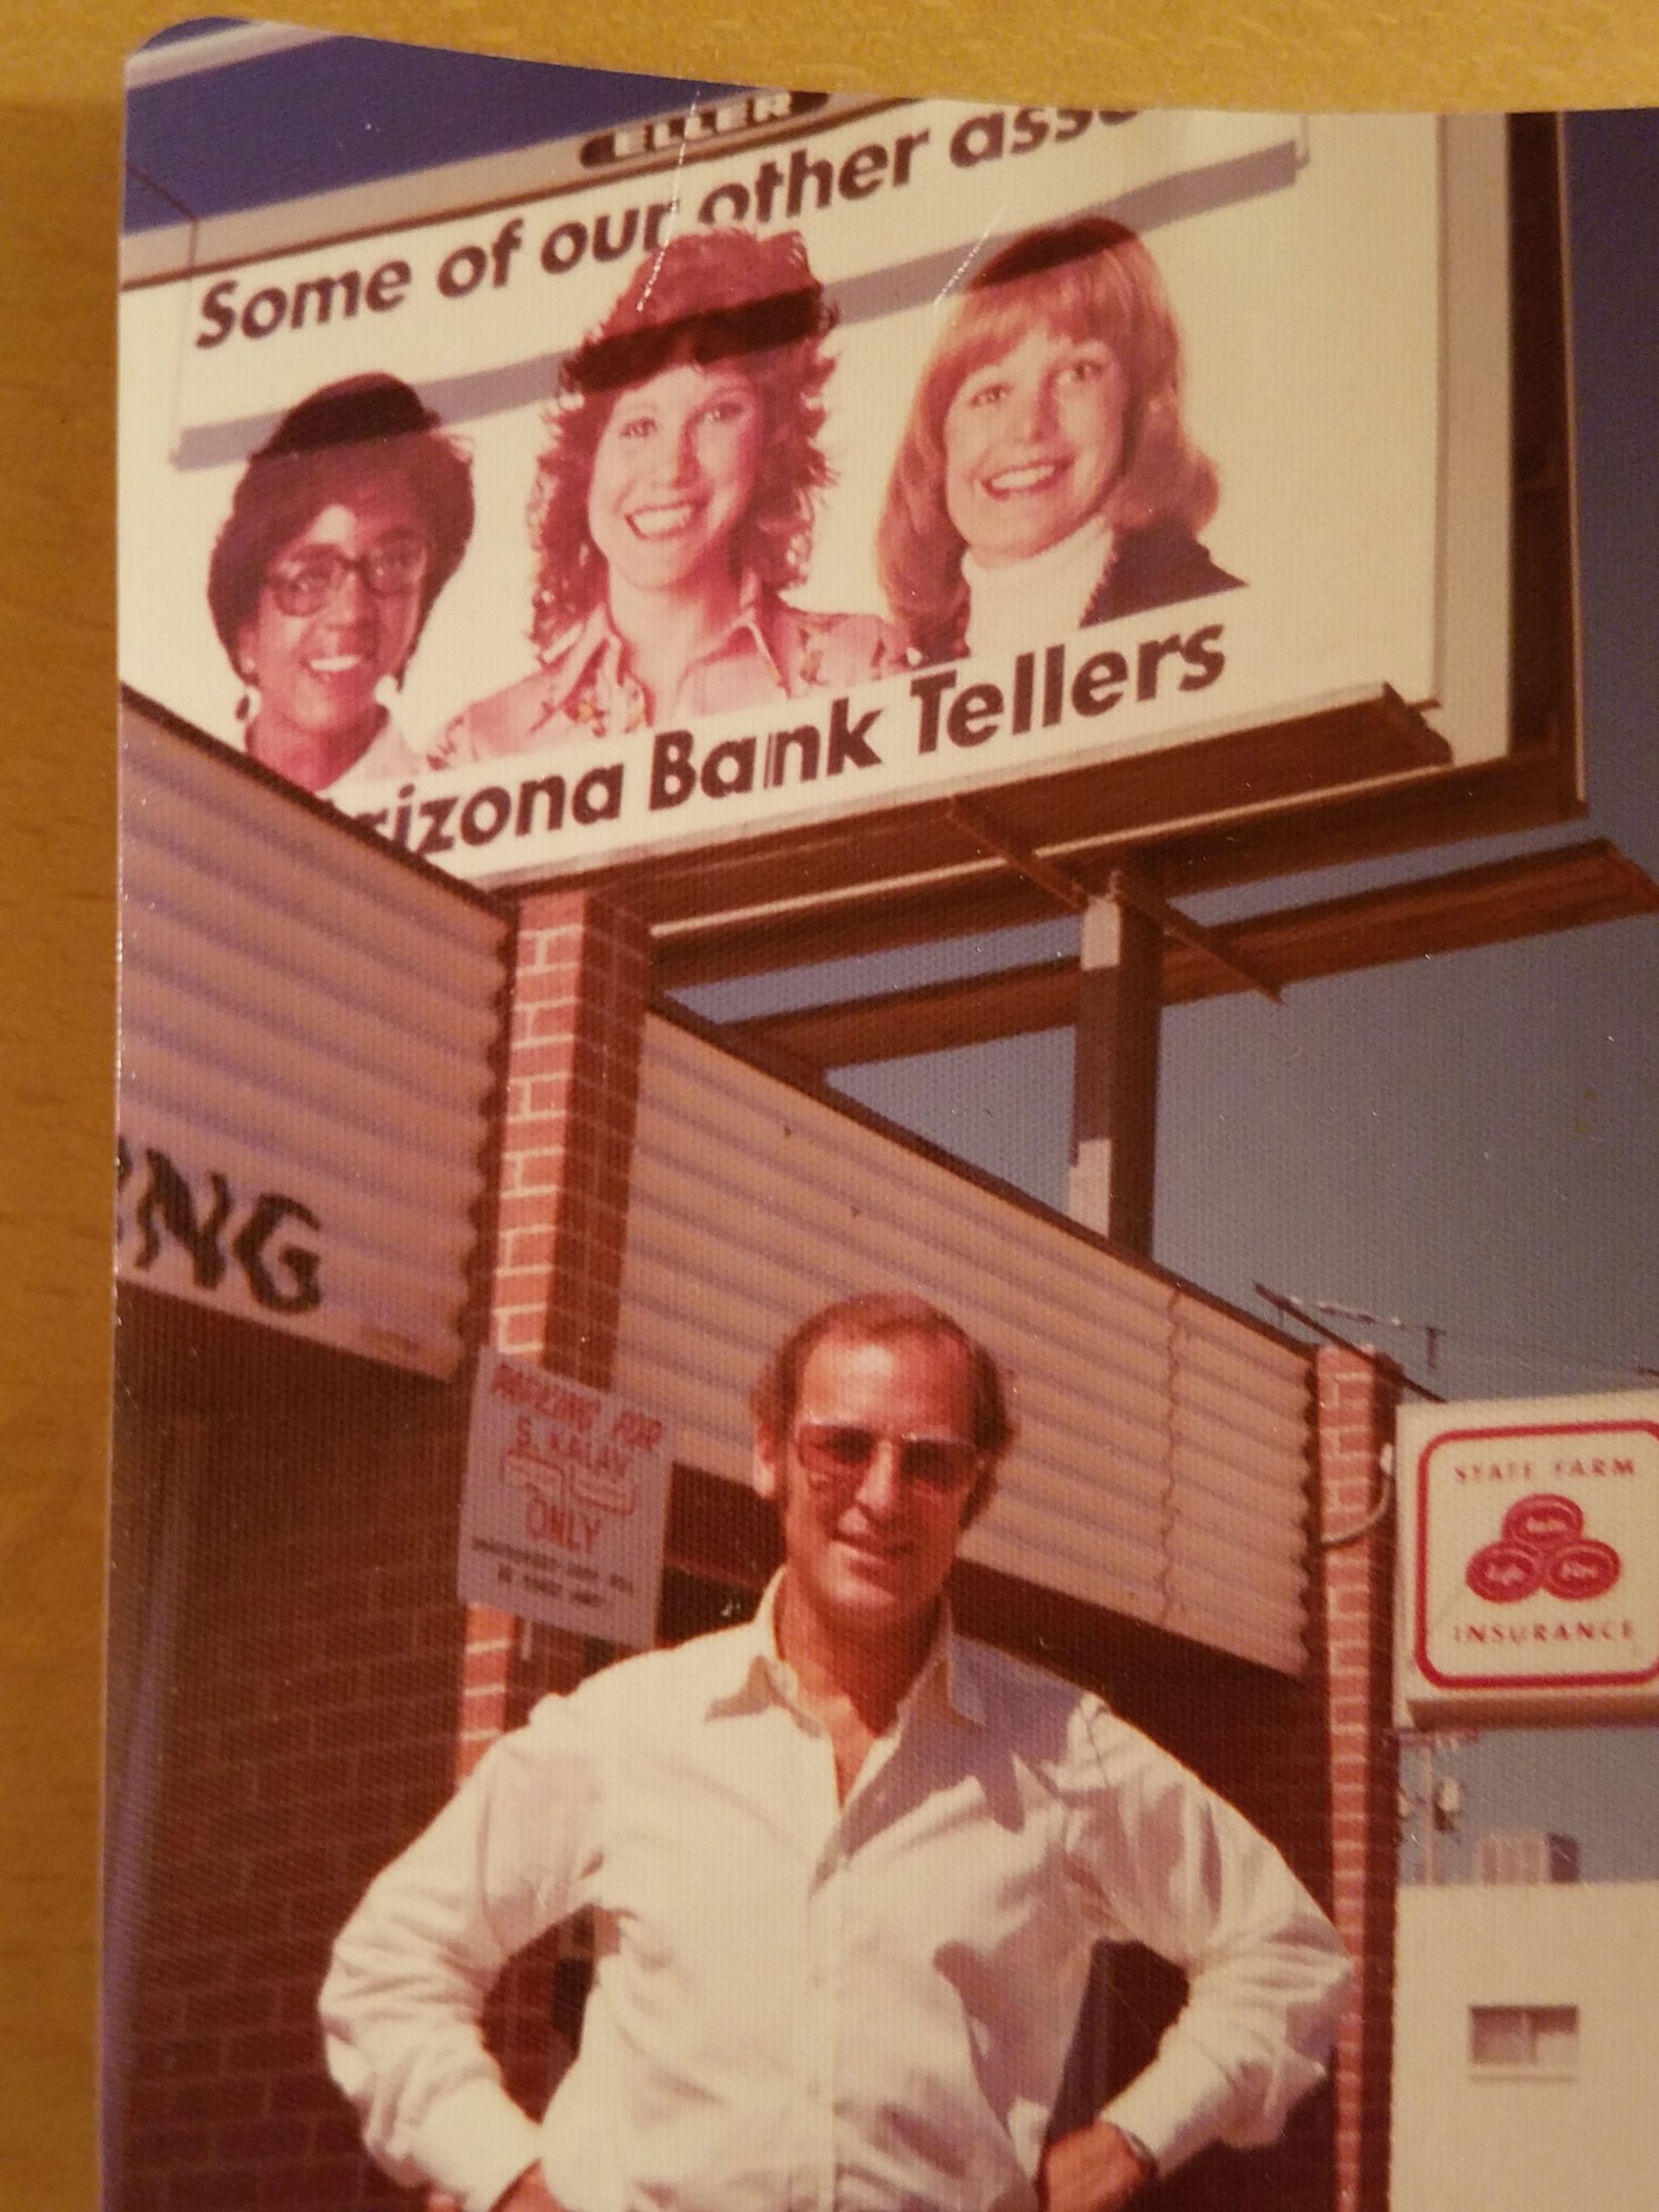 Barkin's father posed outside a billboard in Arizona featuring his daughter.